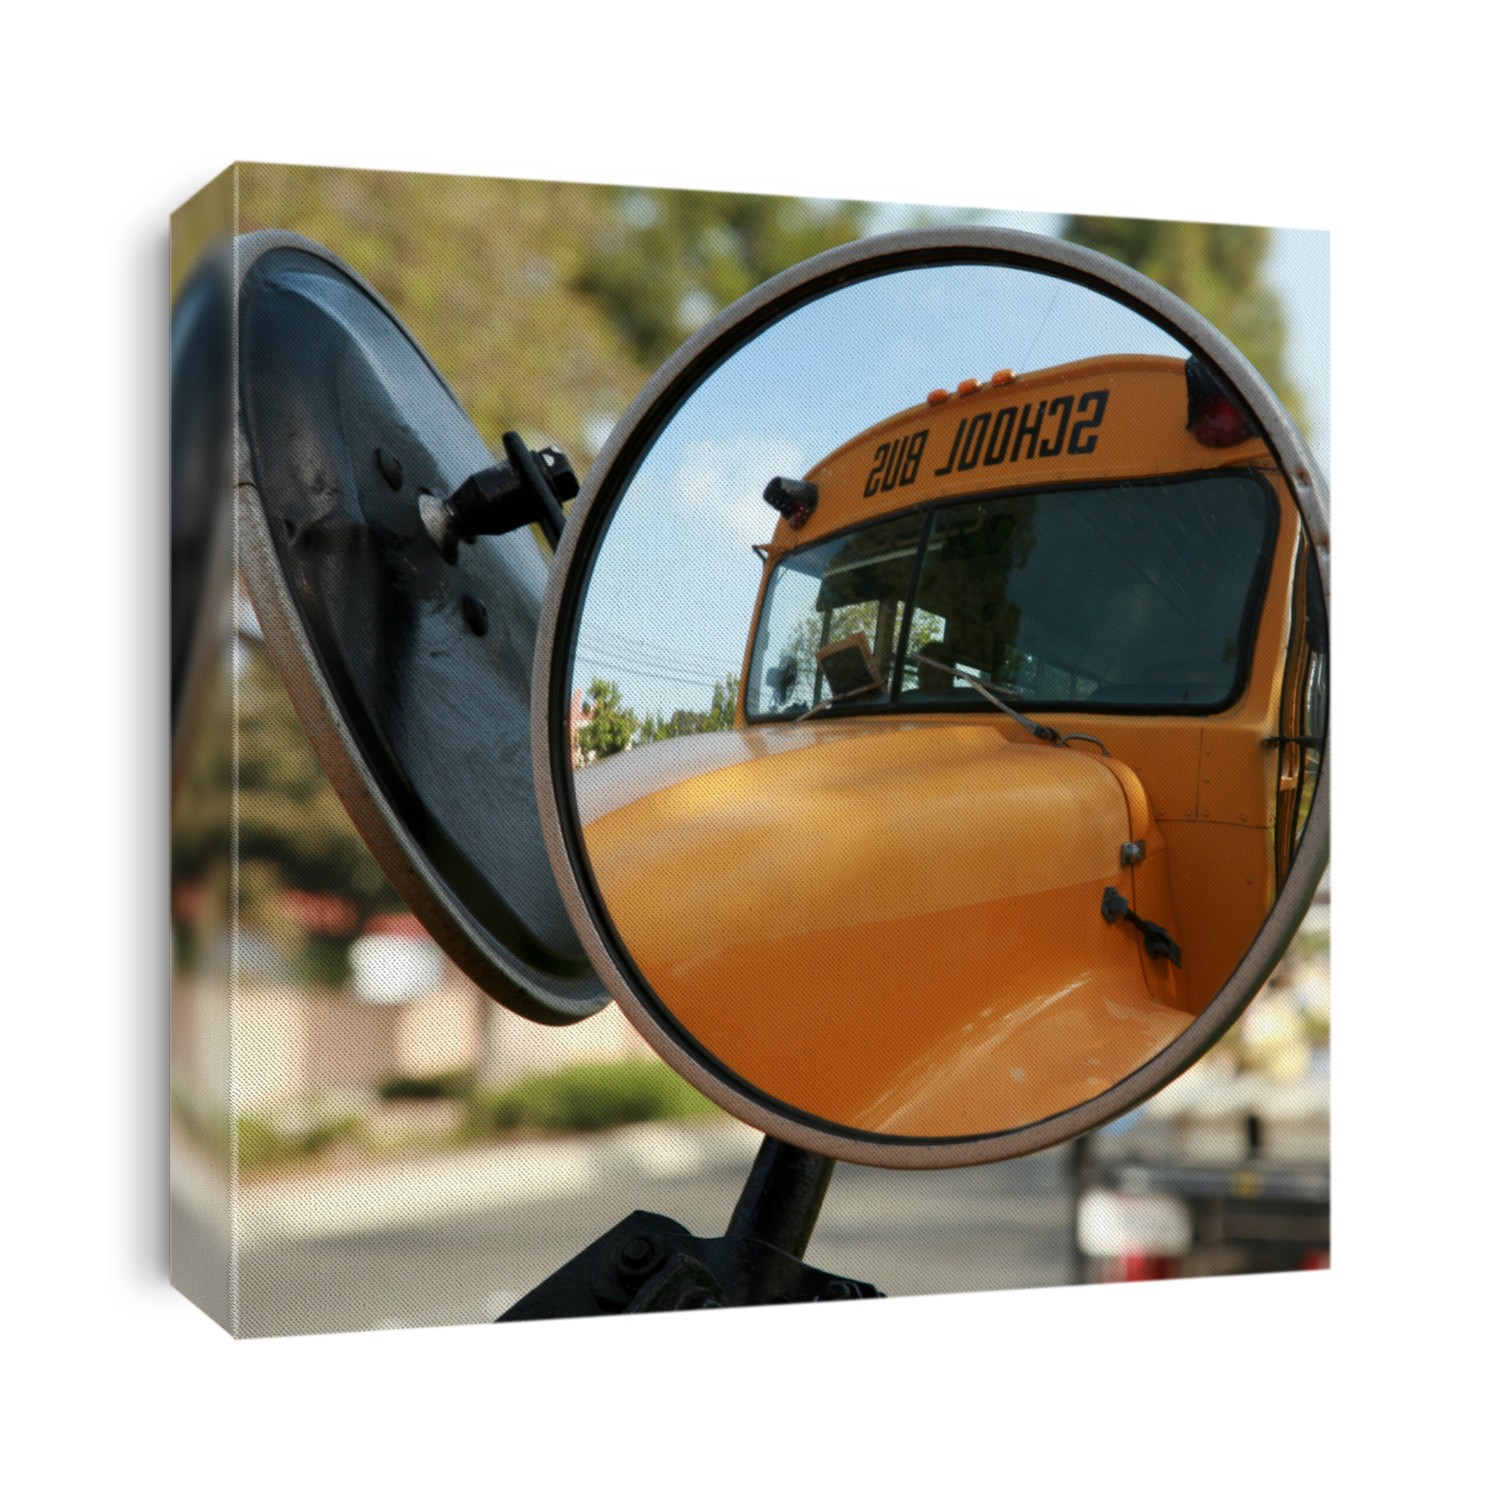 a school bus as seen from its convex mirror